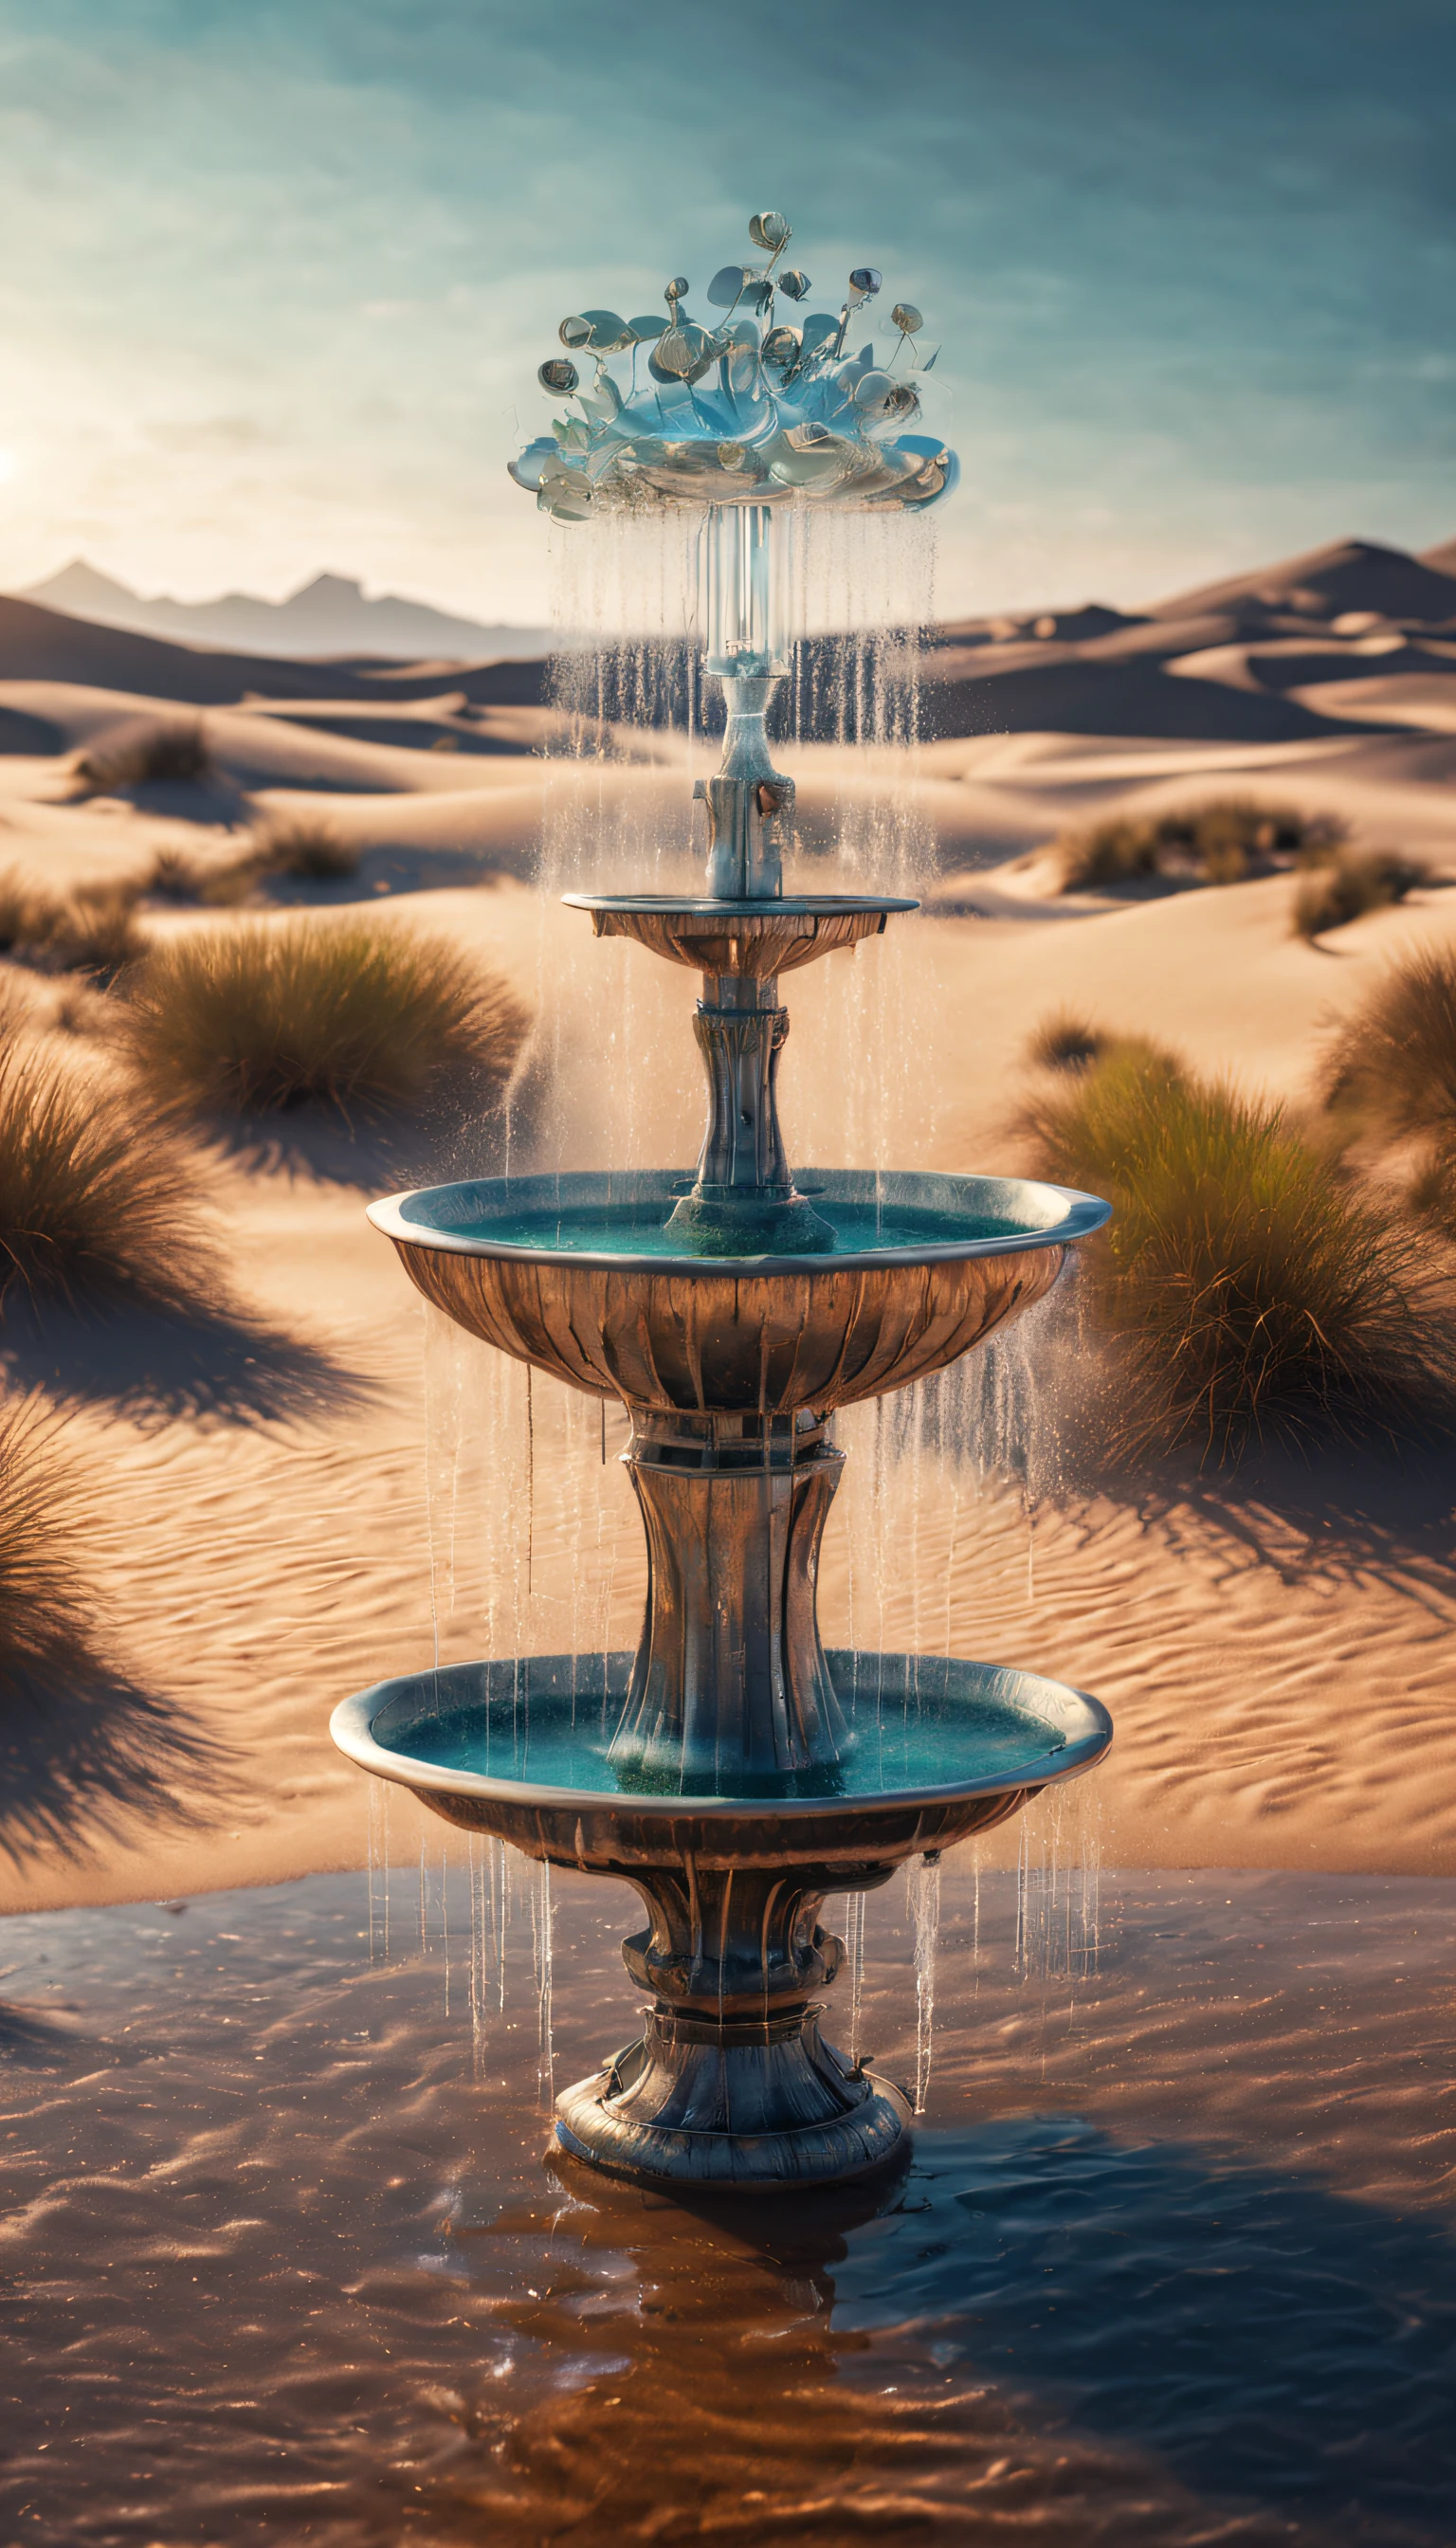 Surreal 3D rendering，Large cybernetic wishing fountain depicted in the dunes, A cactus-shaped faucet sprays water, water spray，Reflection in the water，Ethereal，Super fantasy